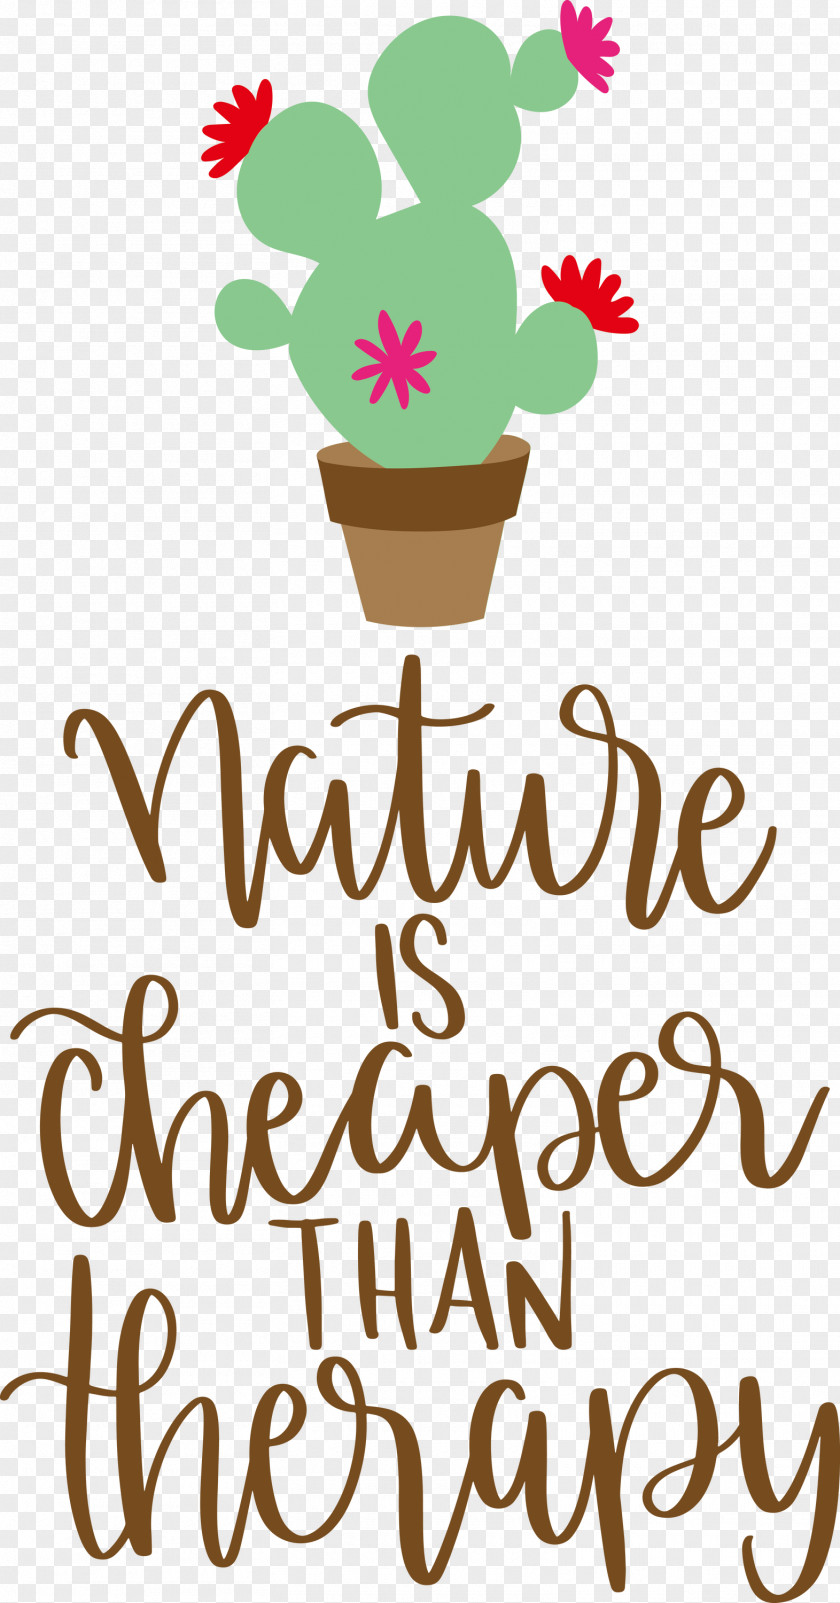 Nature Is Cheaper Than Therapy PNG